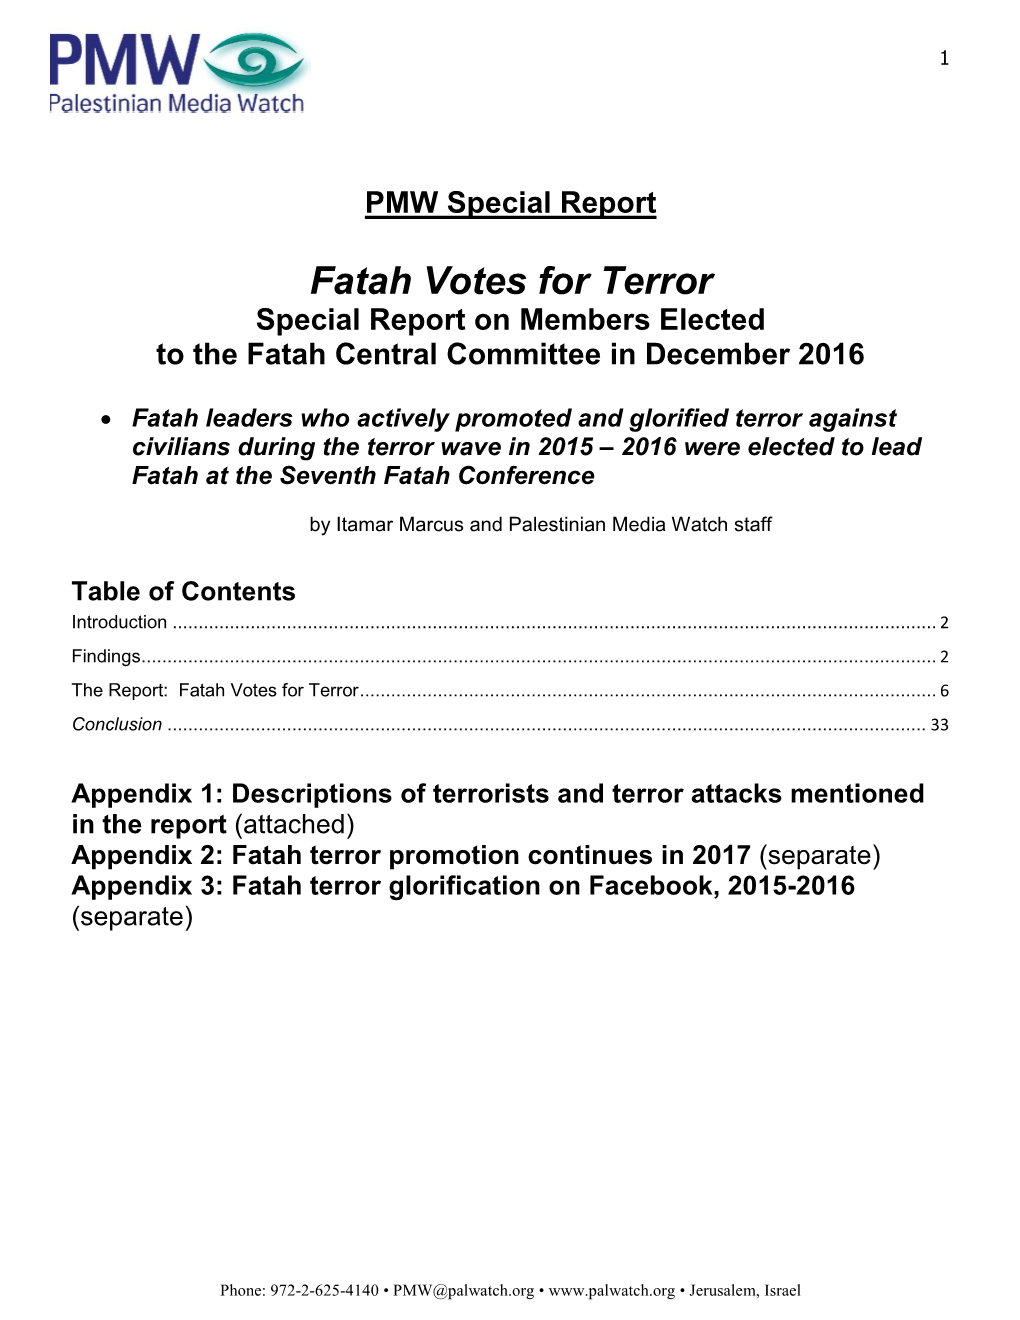 Fatah Votes for Terror Special Report on Members Elected to the Fatah Central Committee in December 2016